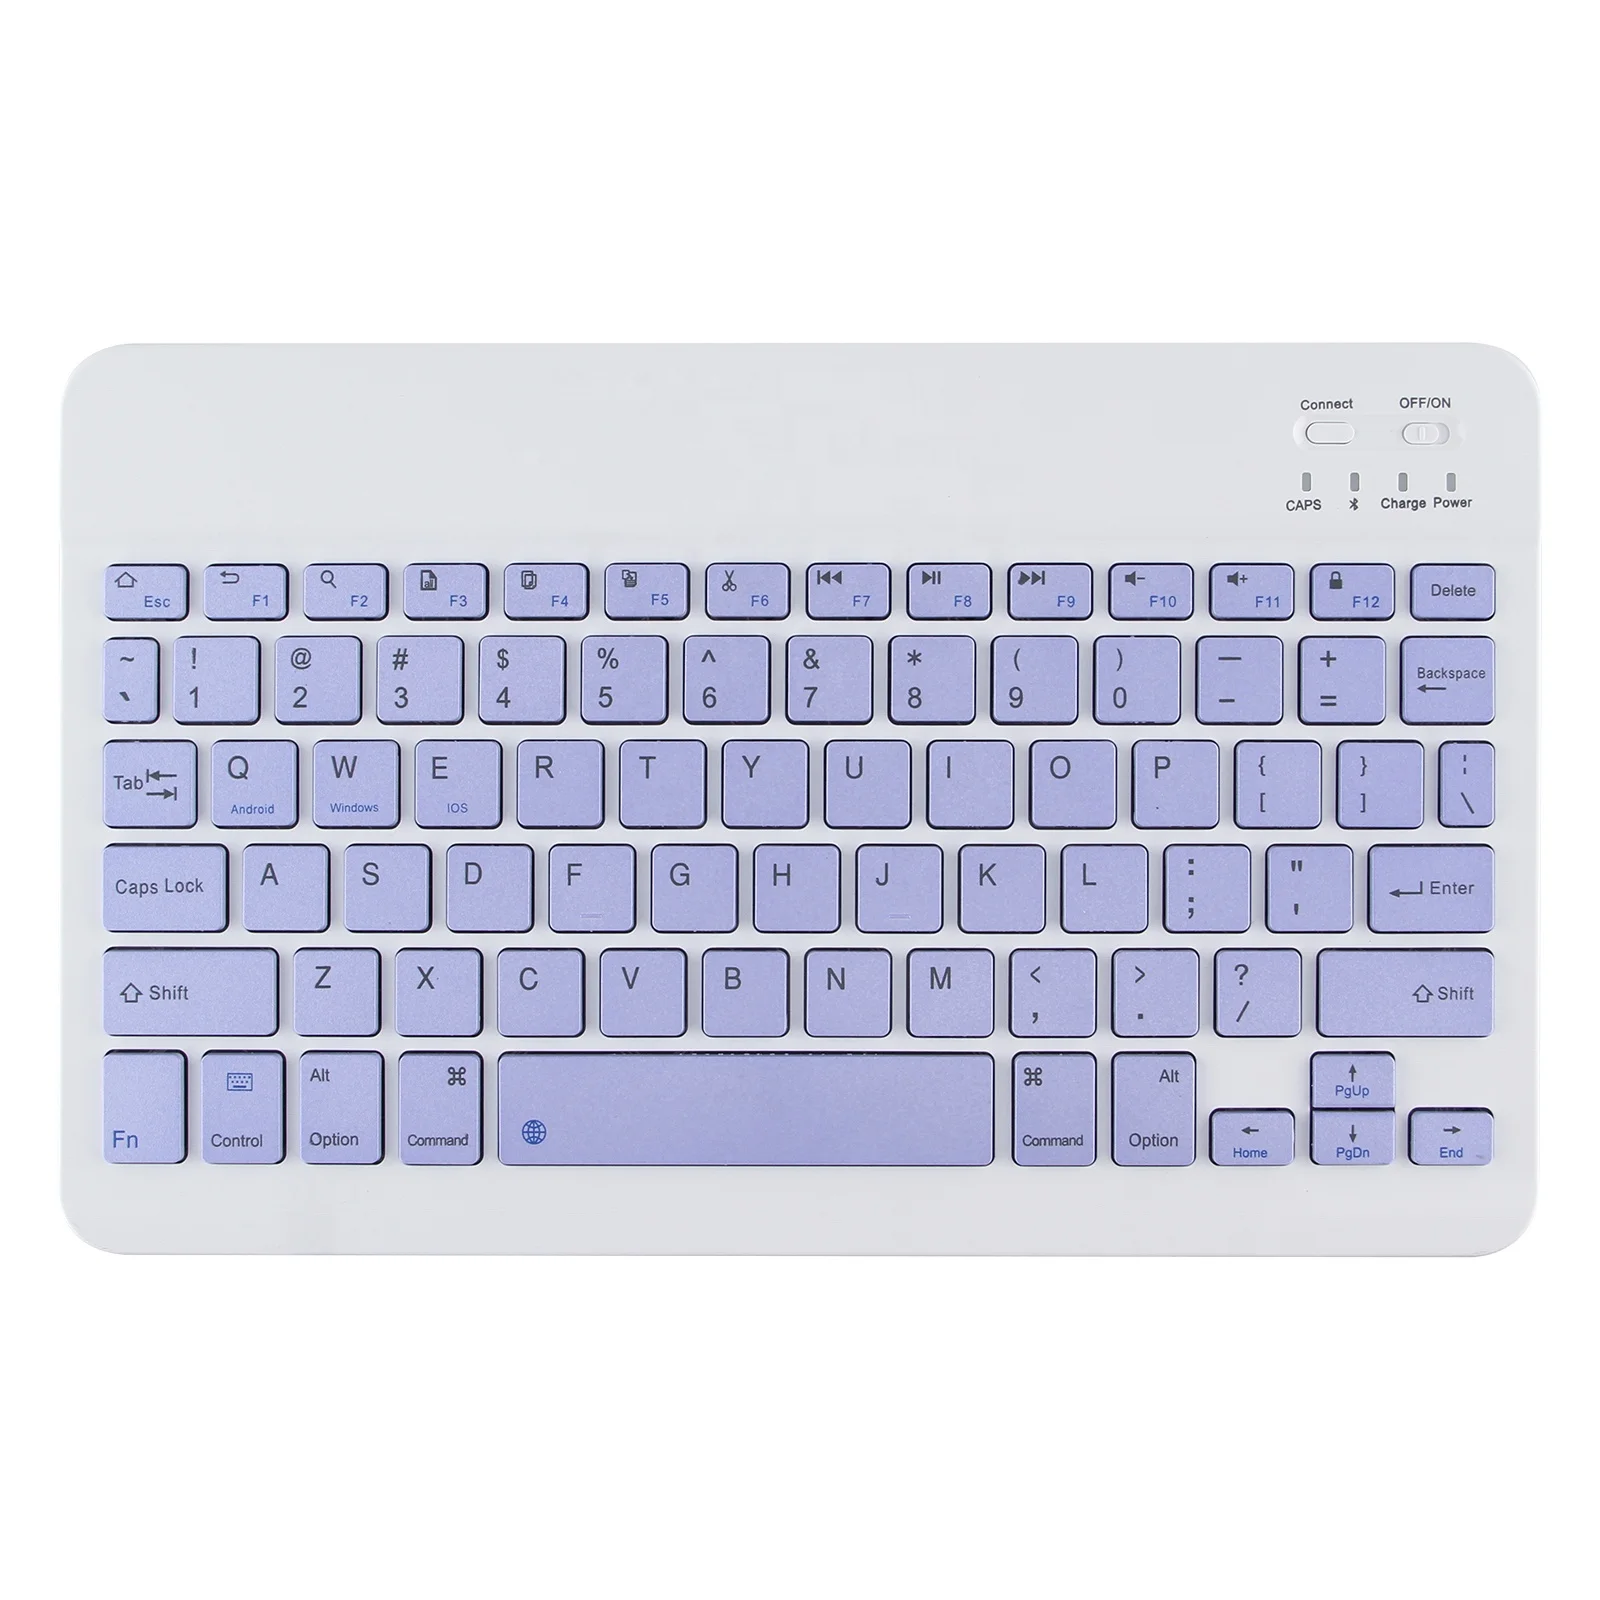 

Christmas office gift tablet bluetooth keyboard for ipad mini keyboard wireless coloful in UK/RU/SP/JP/IT/AR/FR/TR languages, More colors